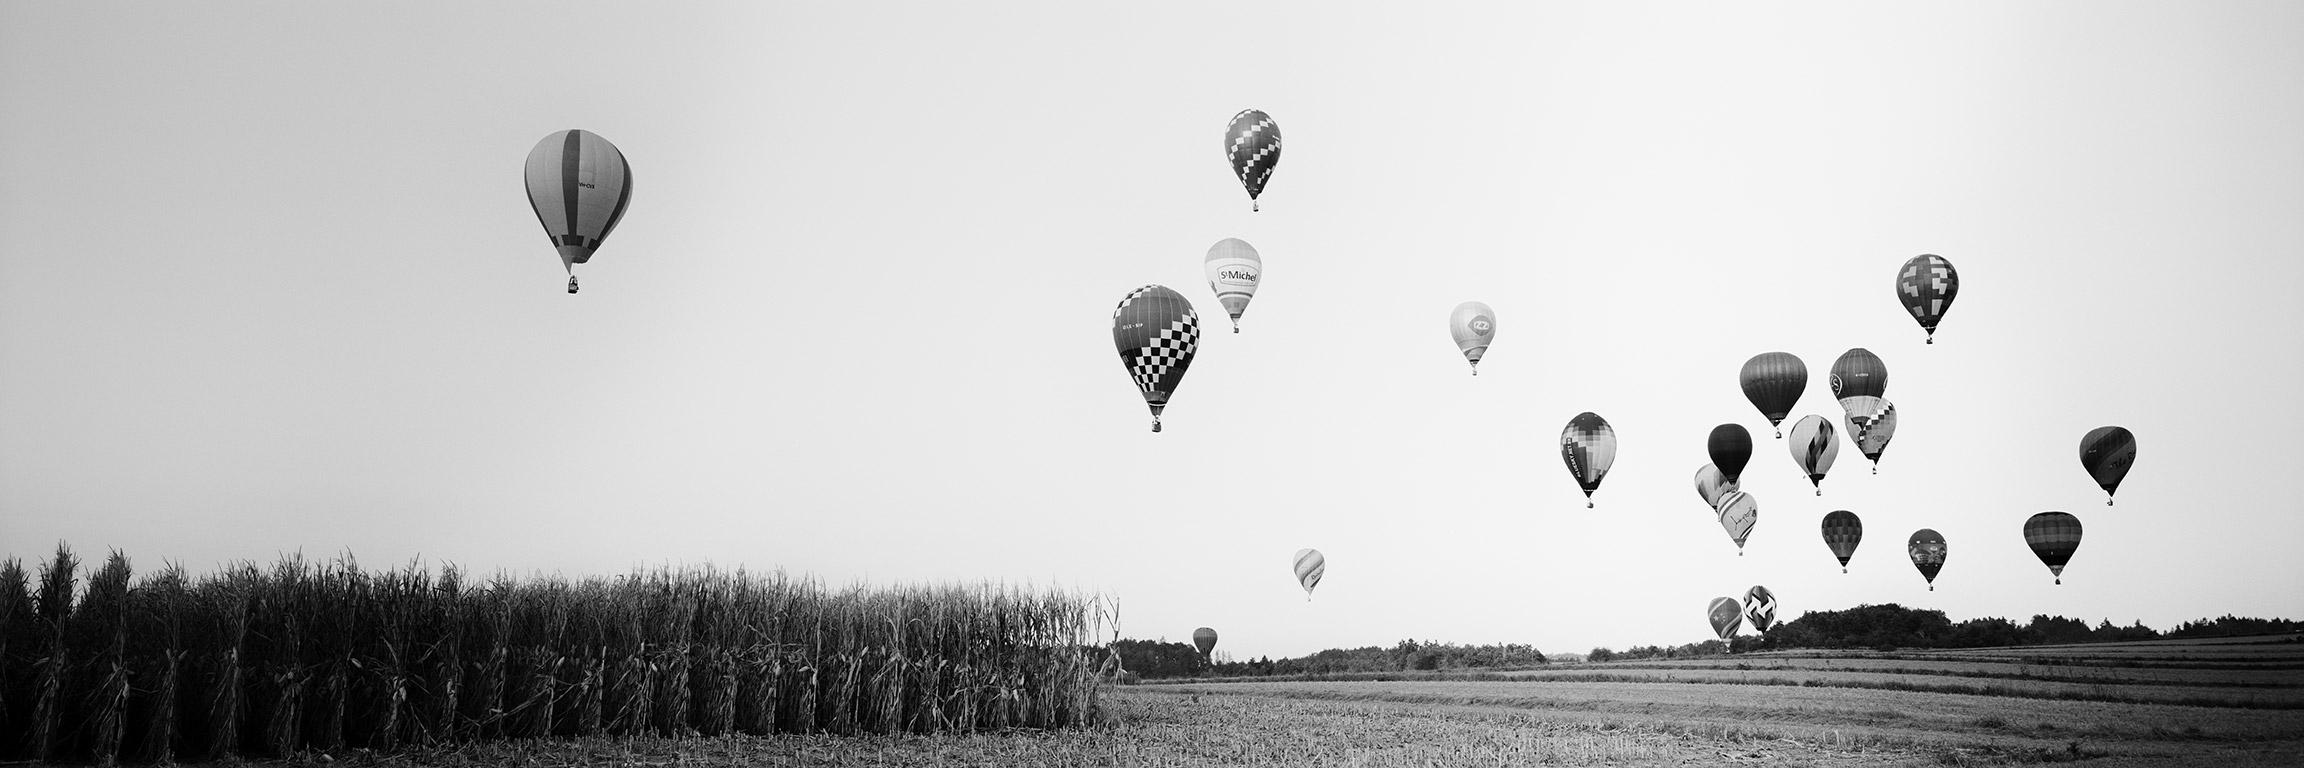 Gerald Berghammer Landscape Photograph - Hot Air Balloon Panorama, Championship, black and white photography, landscape